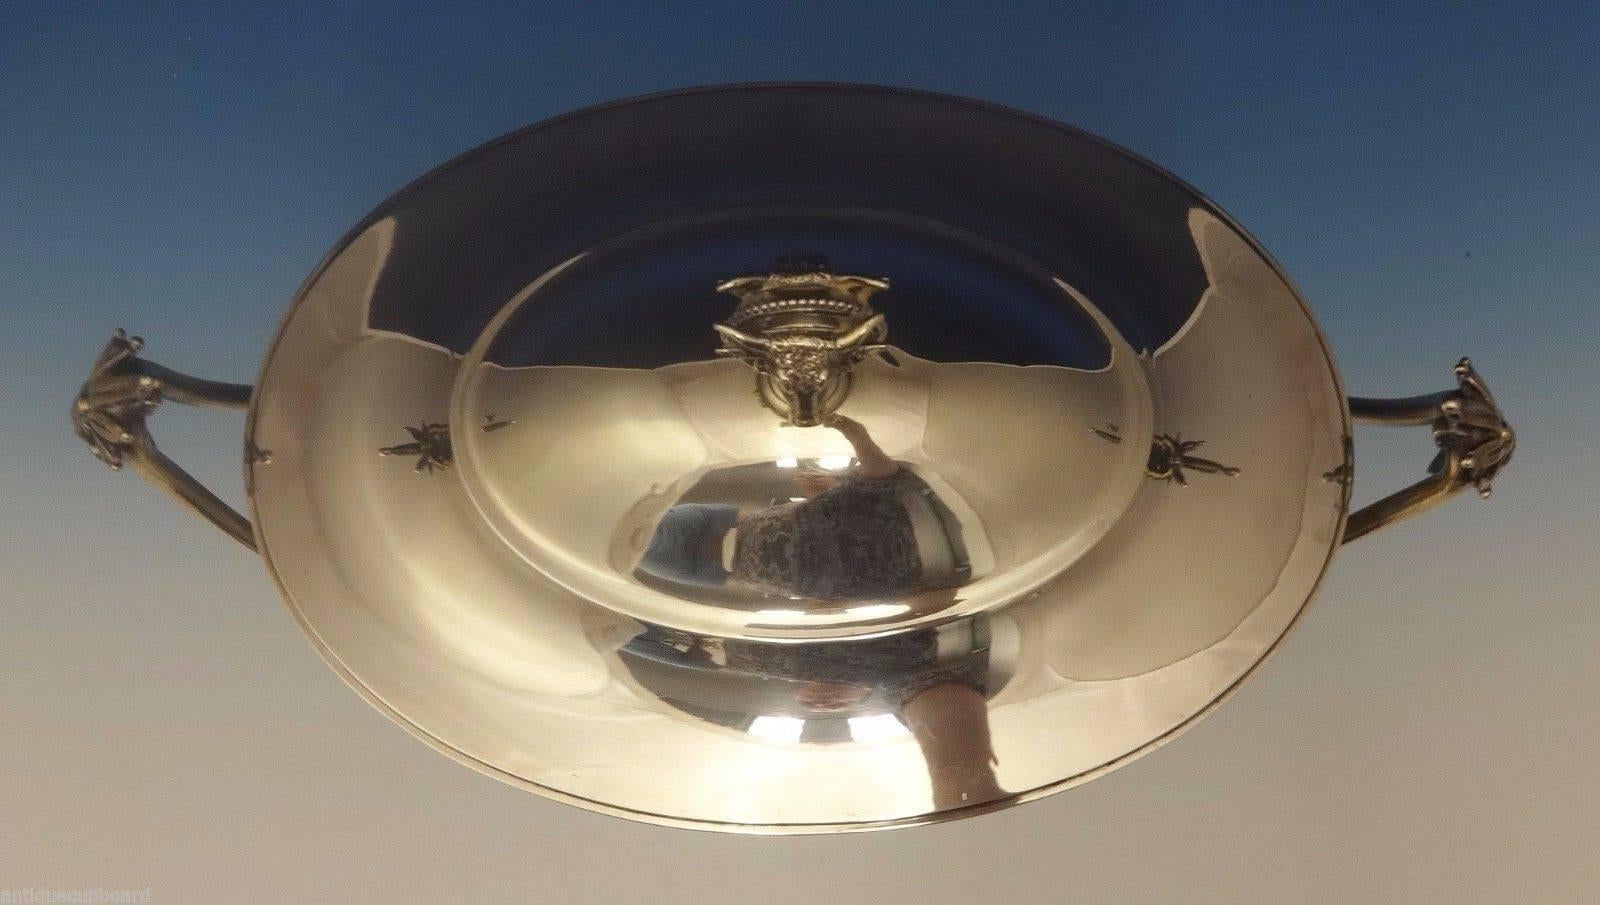 Gorham.

Gorham sterling silver covered tureen featuring a 3-D bull on either side of the finial. There are also applied ornate handles with figural lions. The piece is marked #150 with date letter E for 1872. It will hold 6 1/2 pints. It measures 8